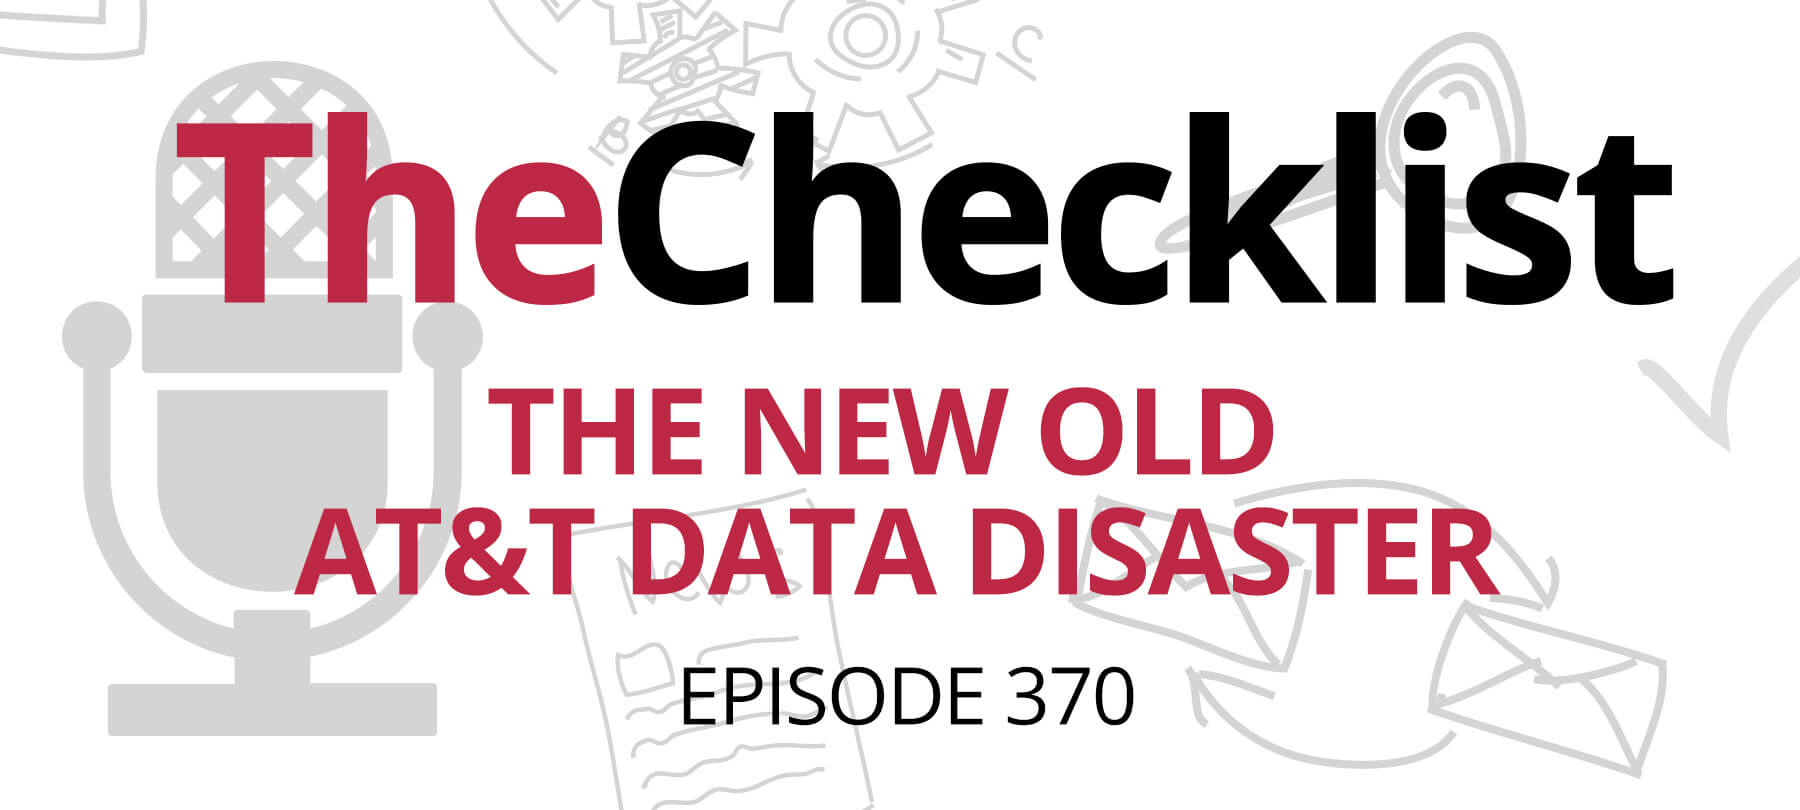 Checklist 370: The New Old AT&T Data Disaster